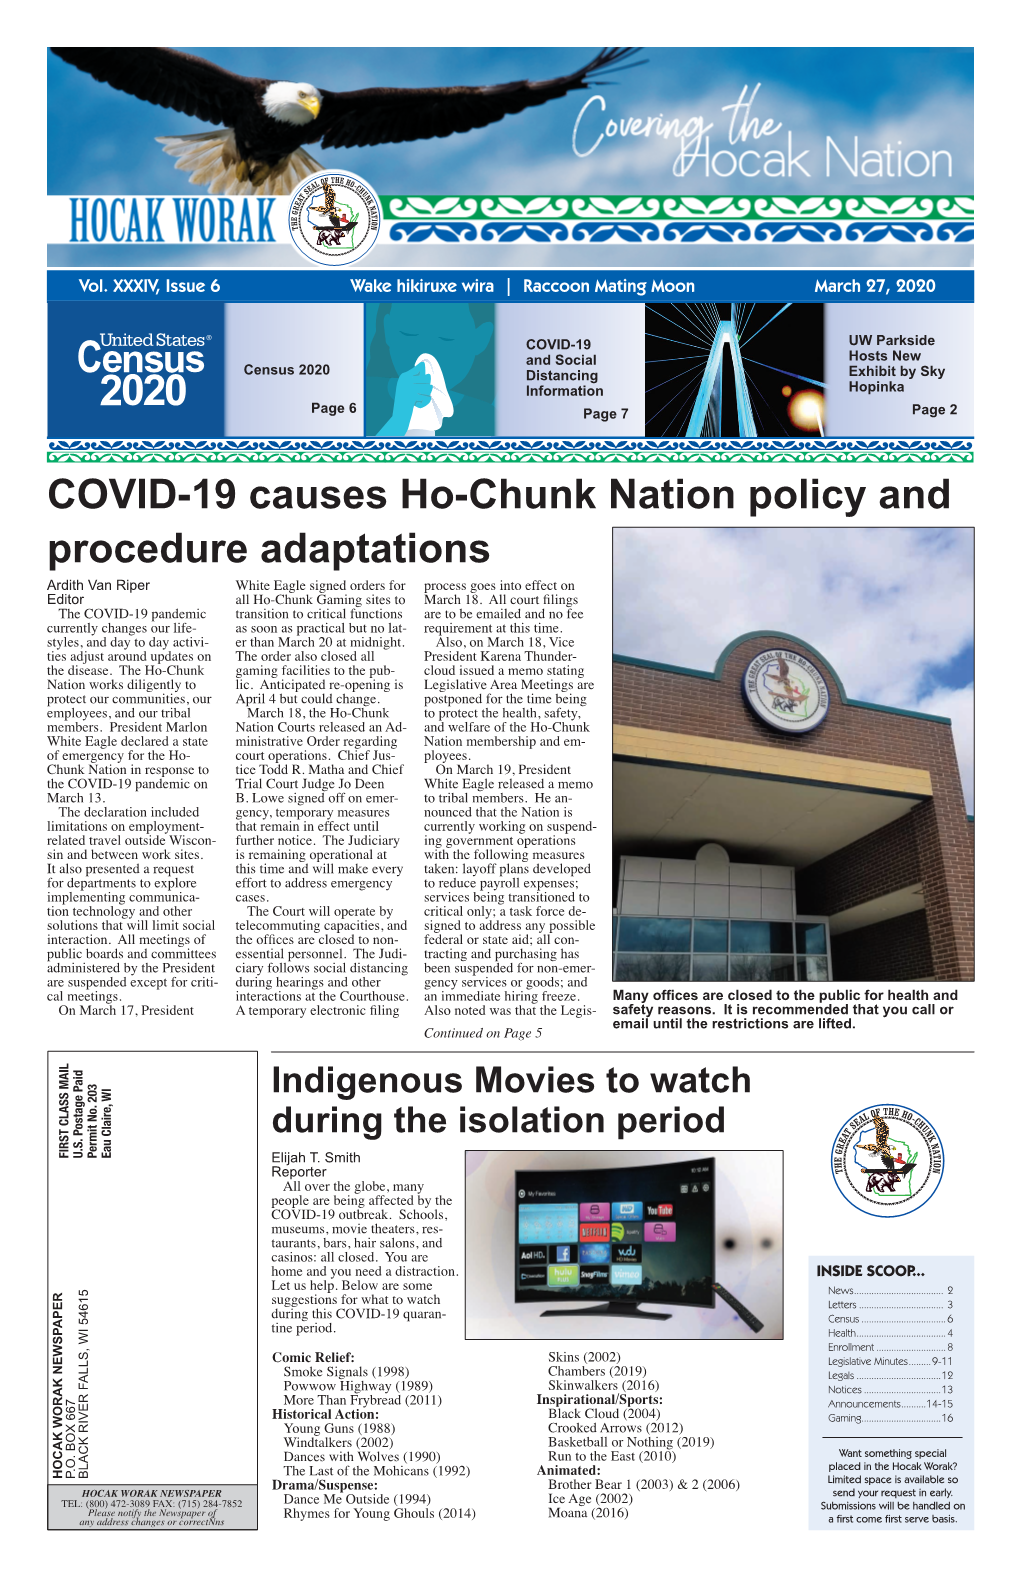 COVID-19 Causes Ho-Chunk Nation Policy and Procedure Adaptations